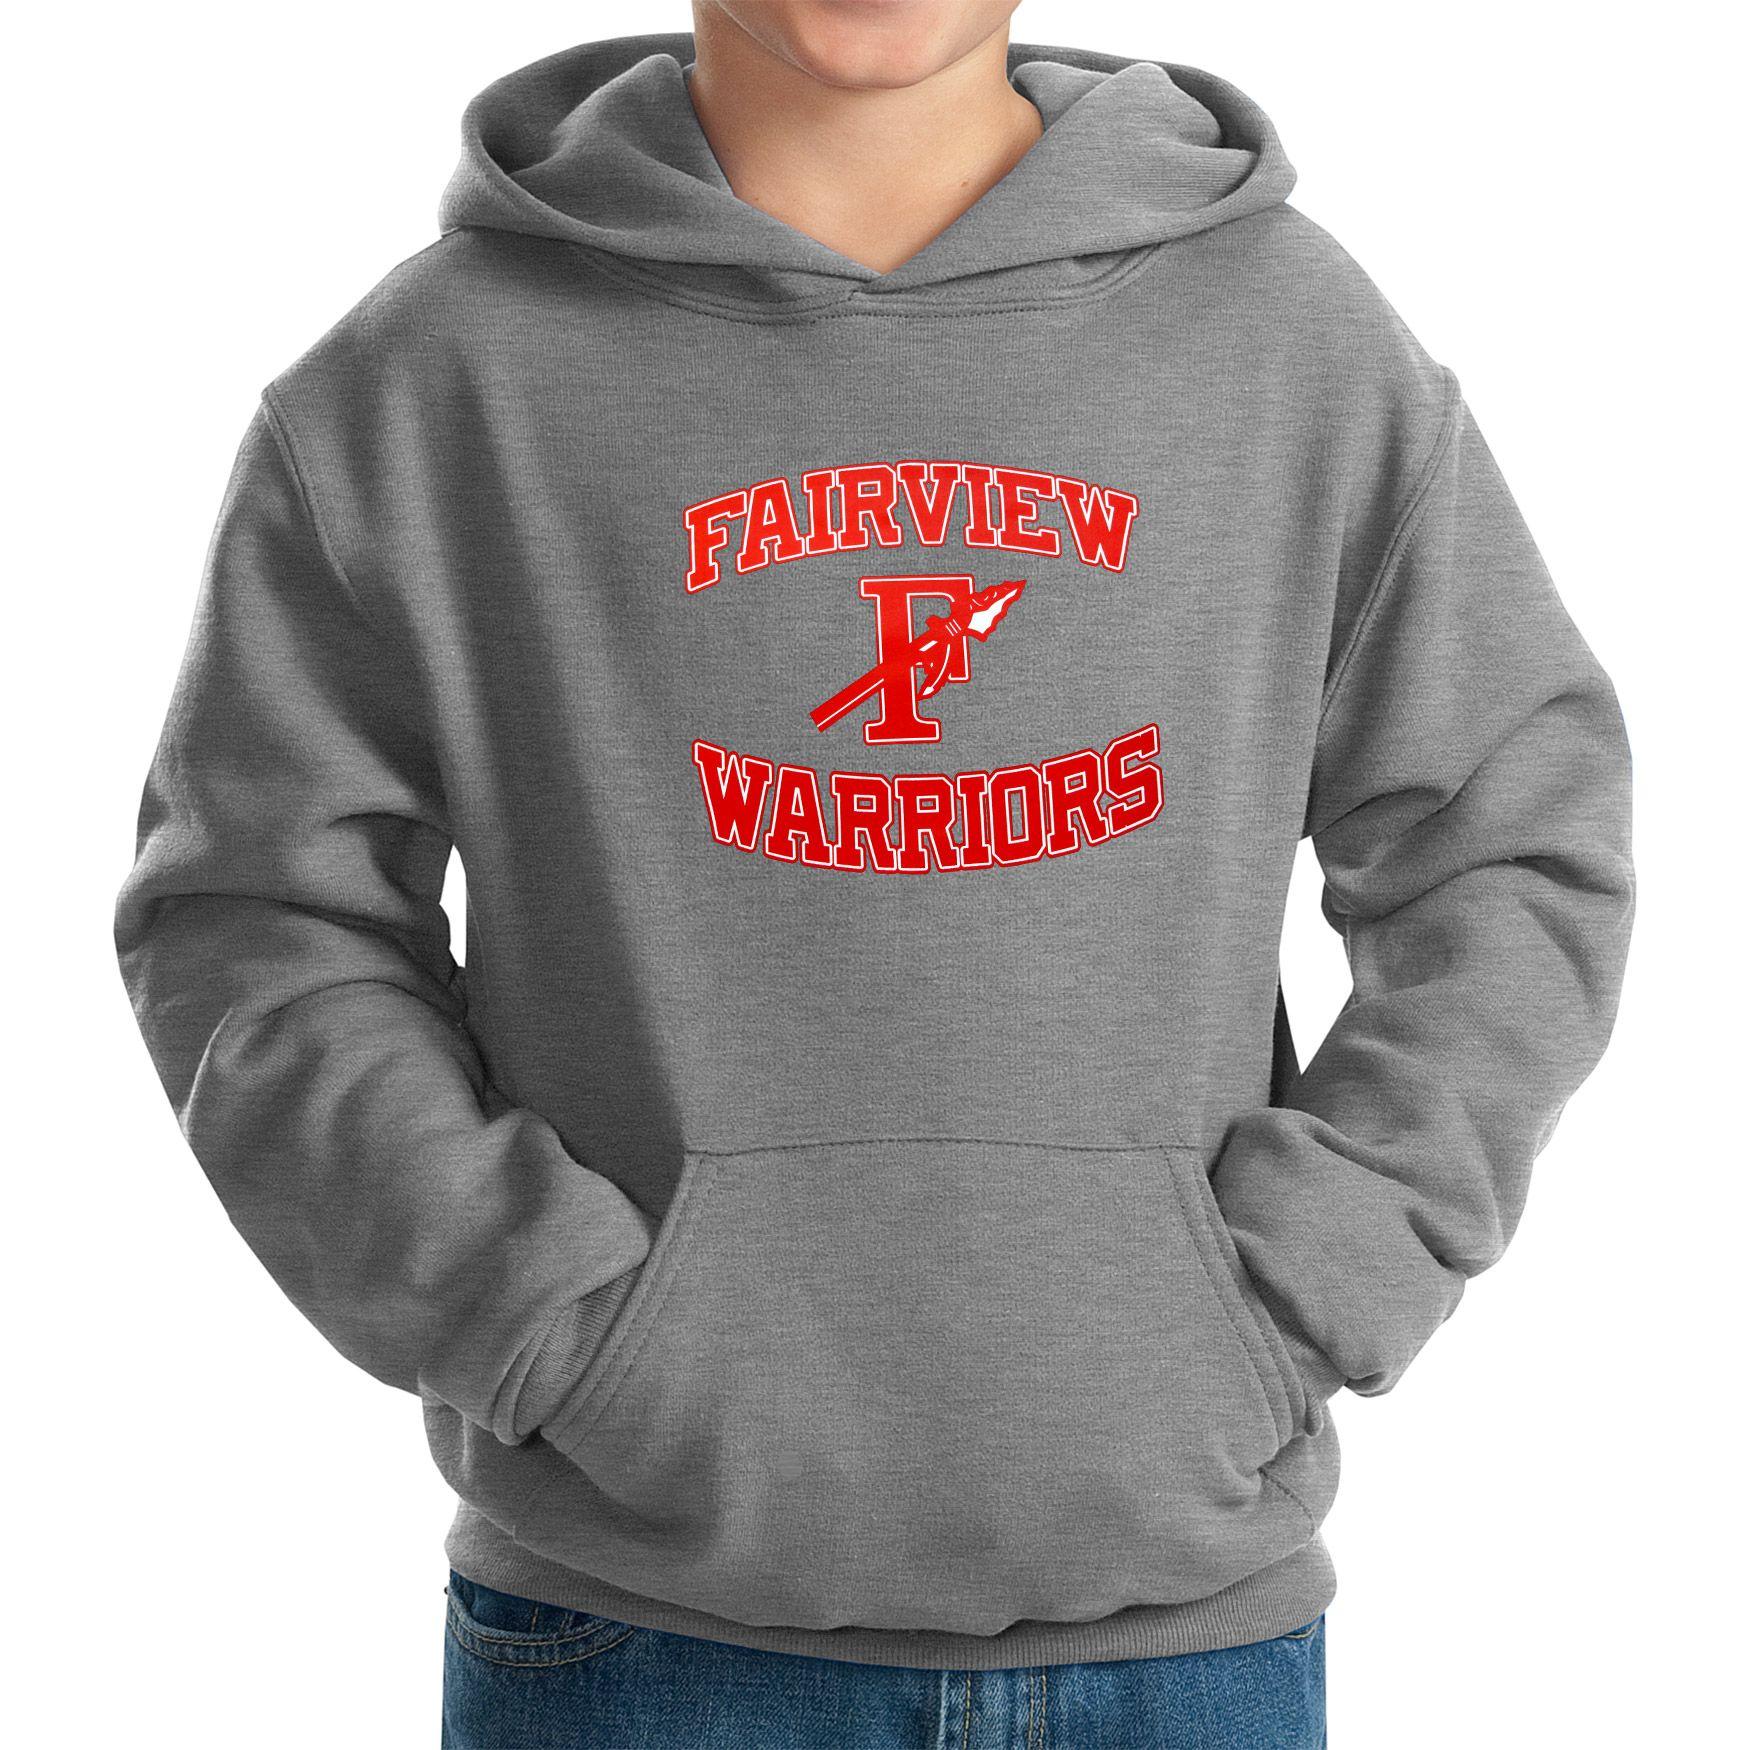 Red and White Spear Logo - Fairview Park Spear Hoodie